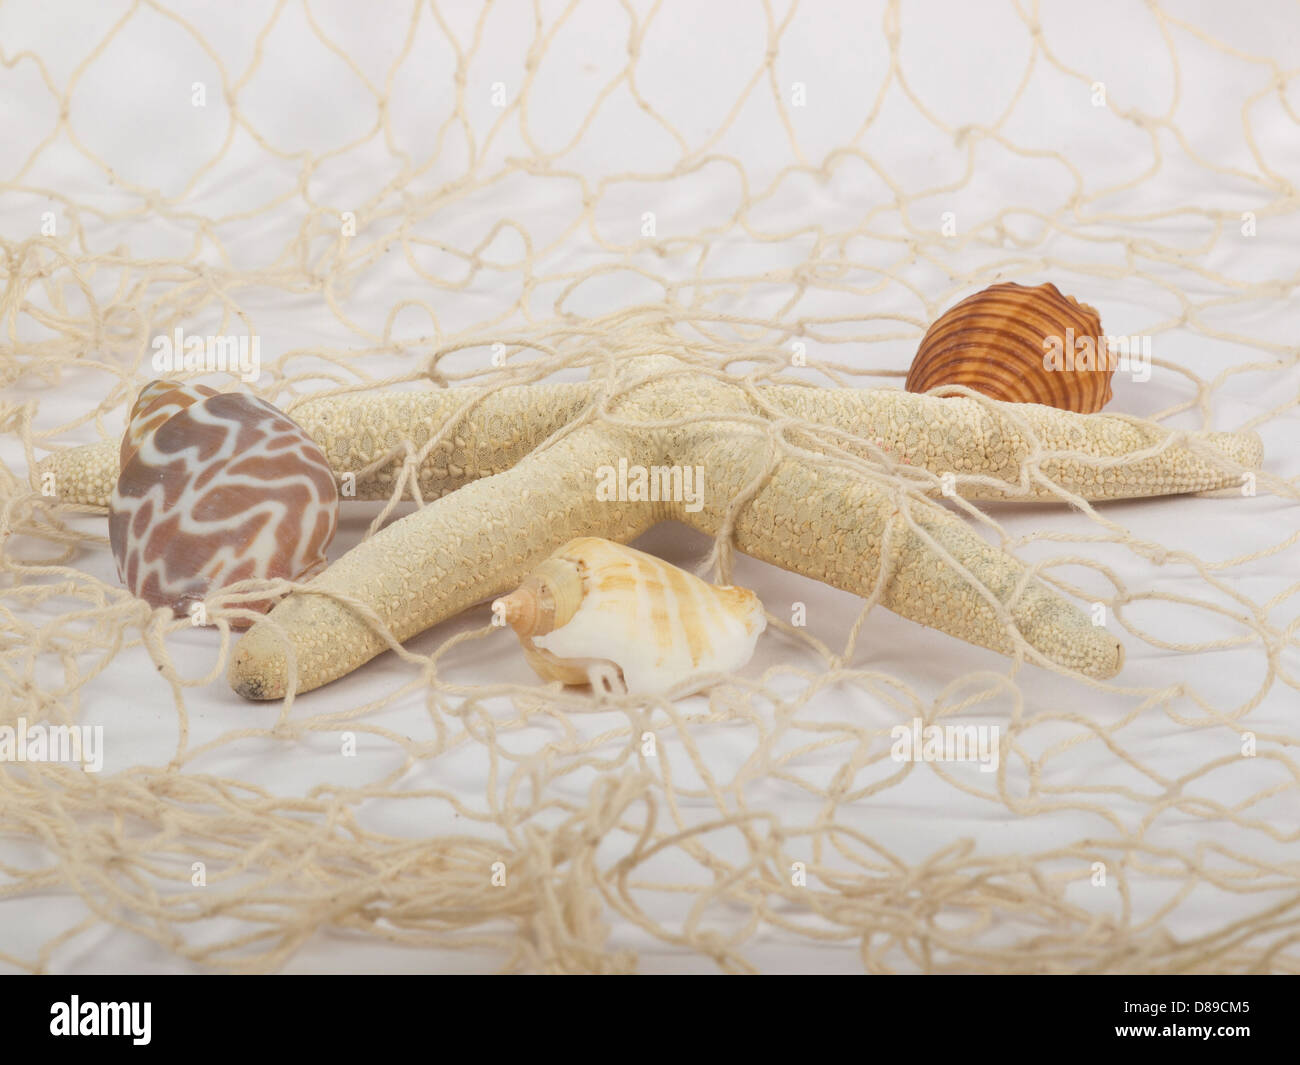 Decorations - Fishing Net With Starfish Stock Photo by